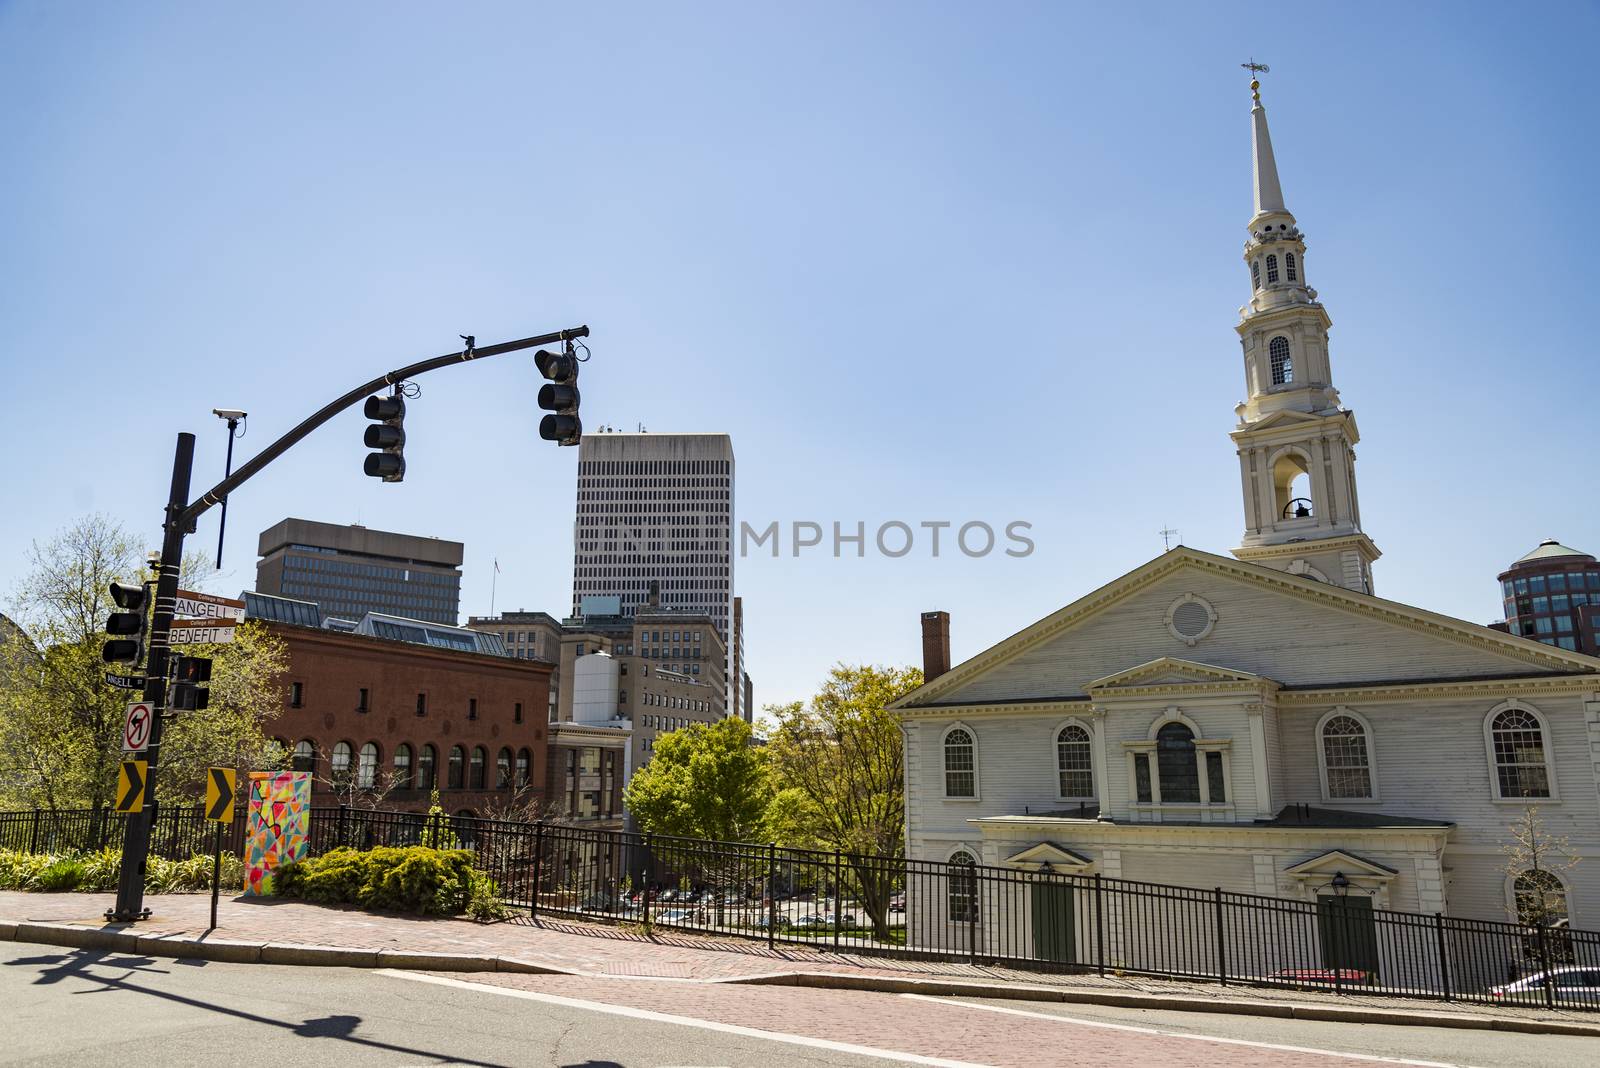 Providence, Rhode Island. Downtown Providence in New England region of the United States.